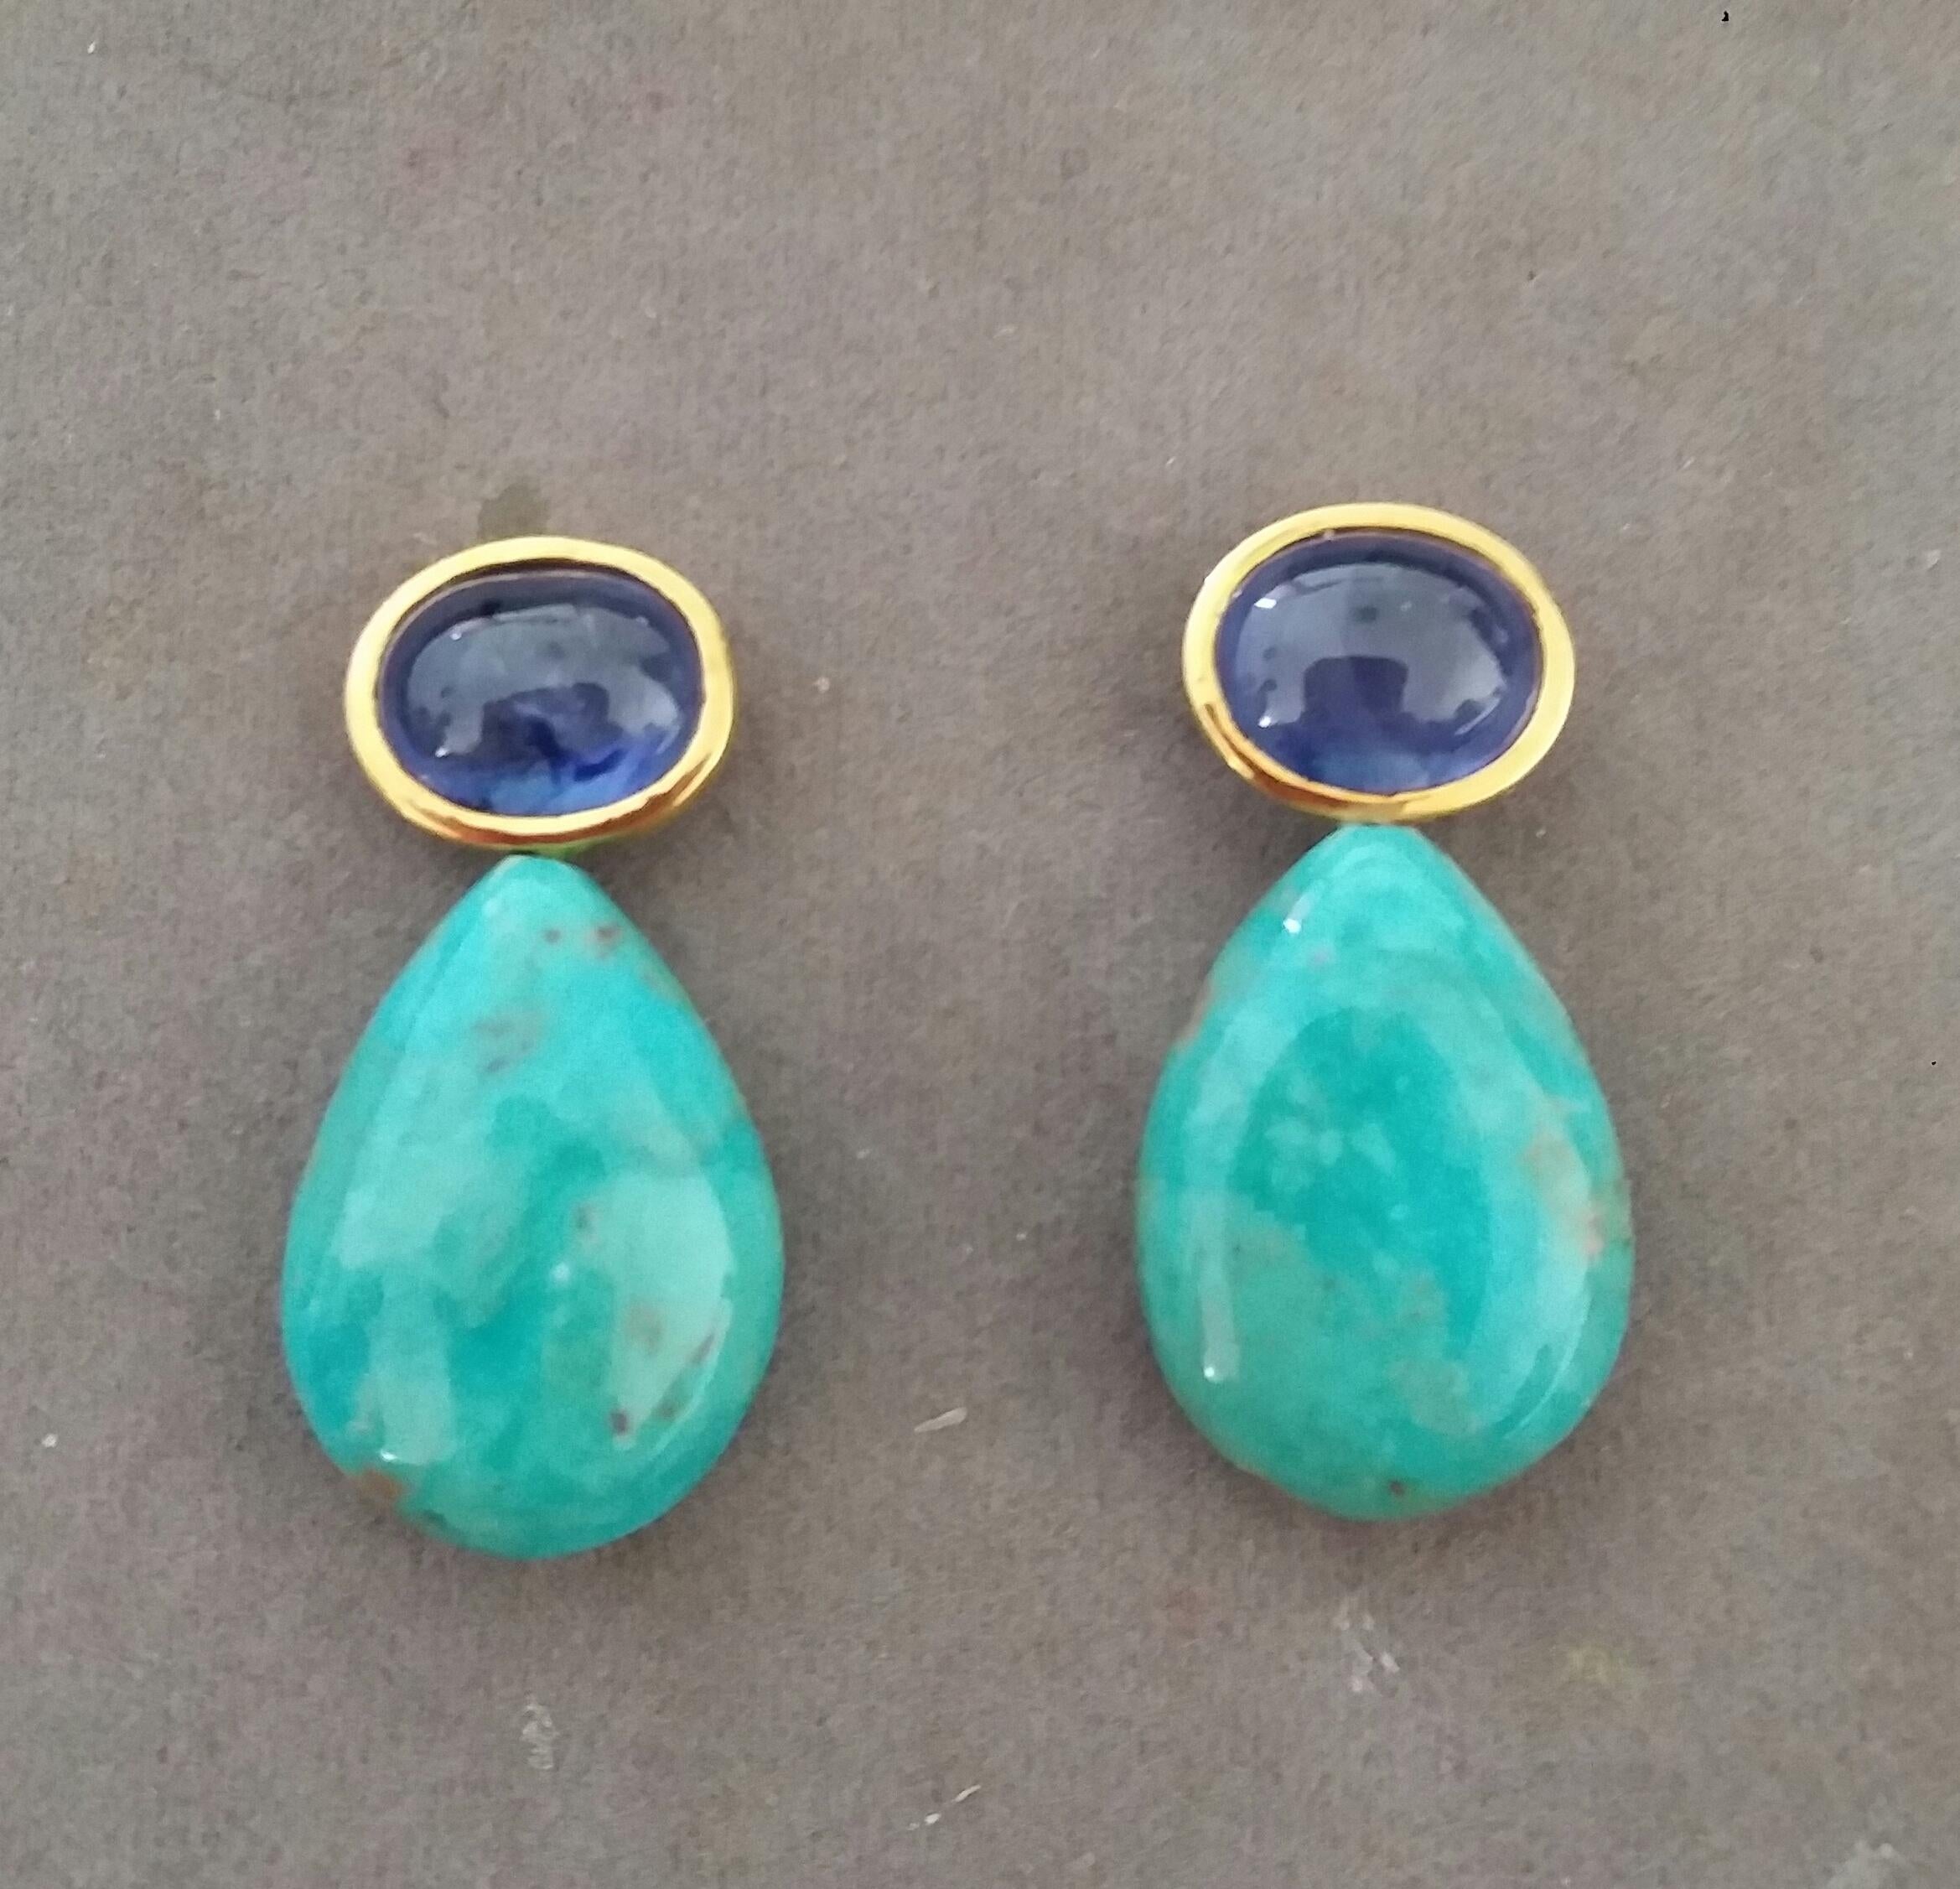 These simple but elegant and handmade earrings have 2 Oval  Blue Sapphire cabs measuring 8 x 10 mm set in a 14 Kt yellow gold bezel  at the top to which are suspended 2 Plain Natural Turquoise  Drops measuring 15 x 21 mm.

In 1978 our workshop